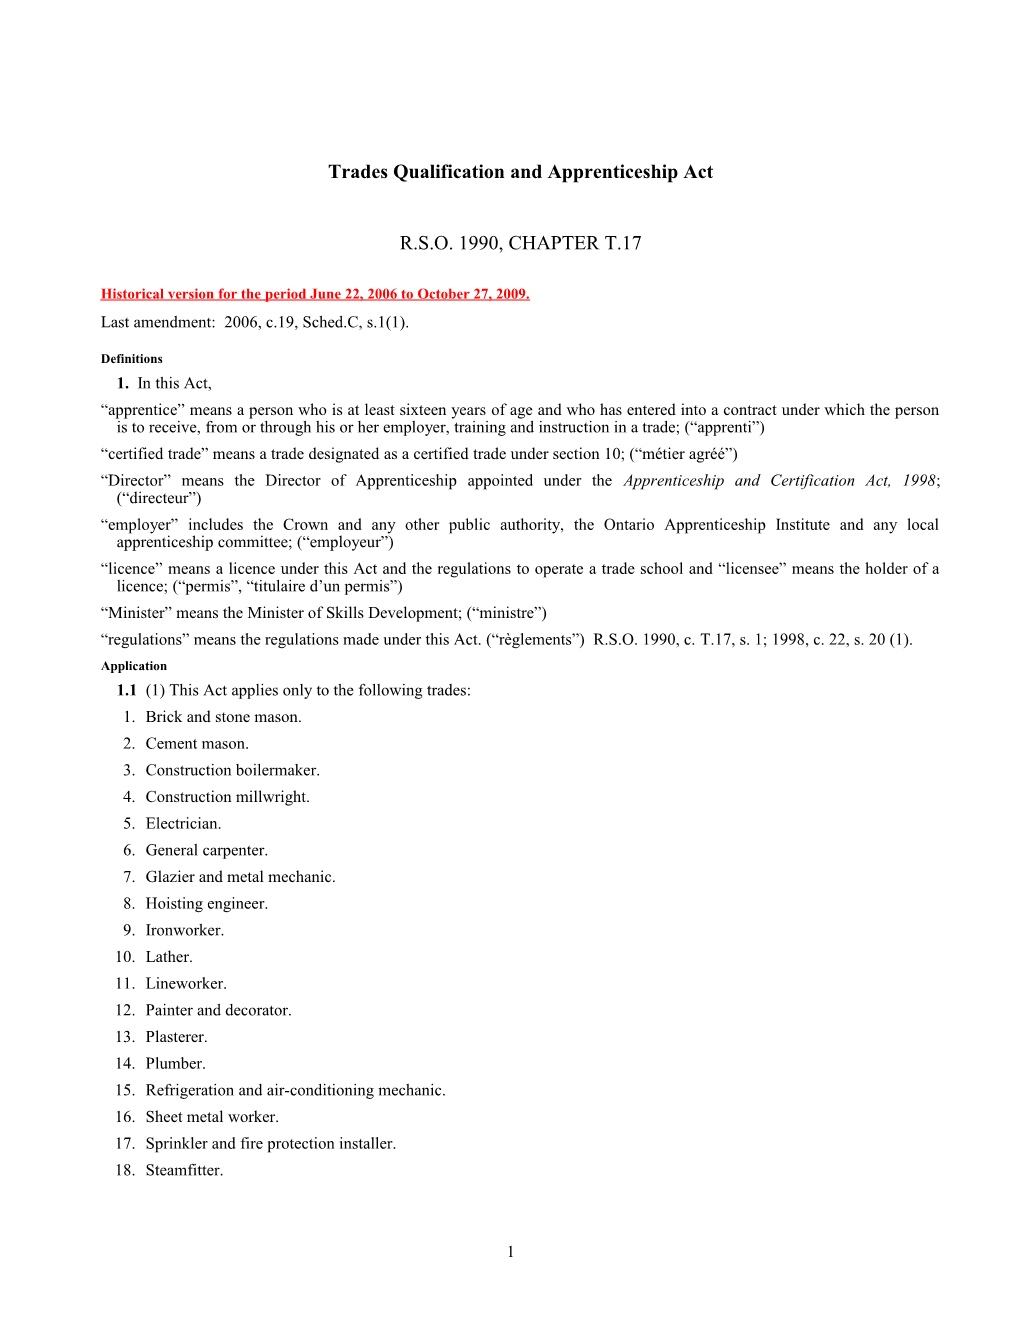 Trades Qualification and Apprenticeship Act, R.S.O. 1990, C. T.17